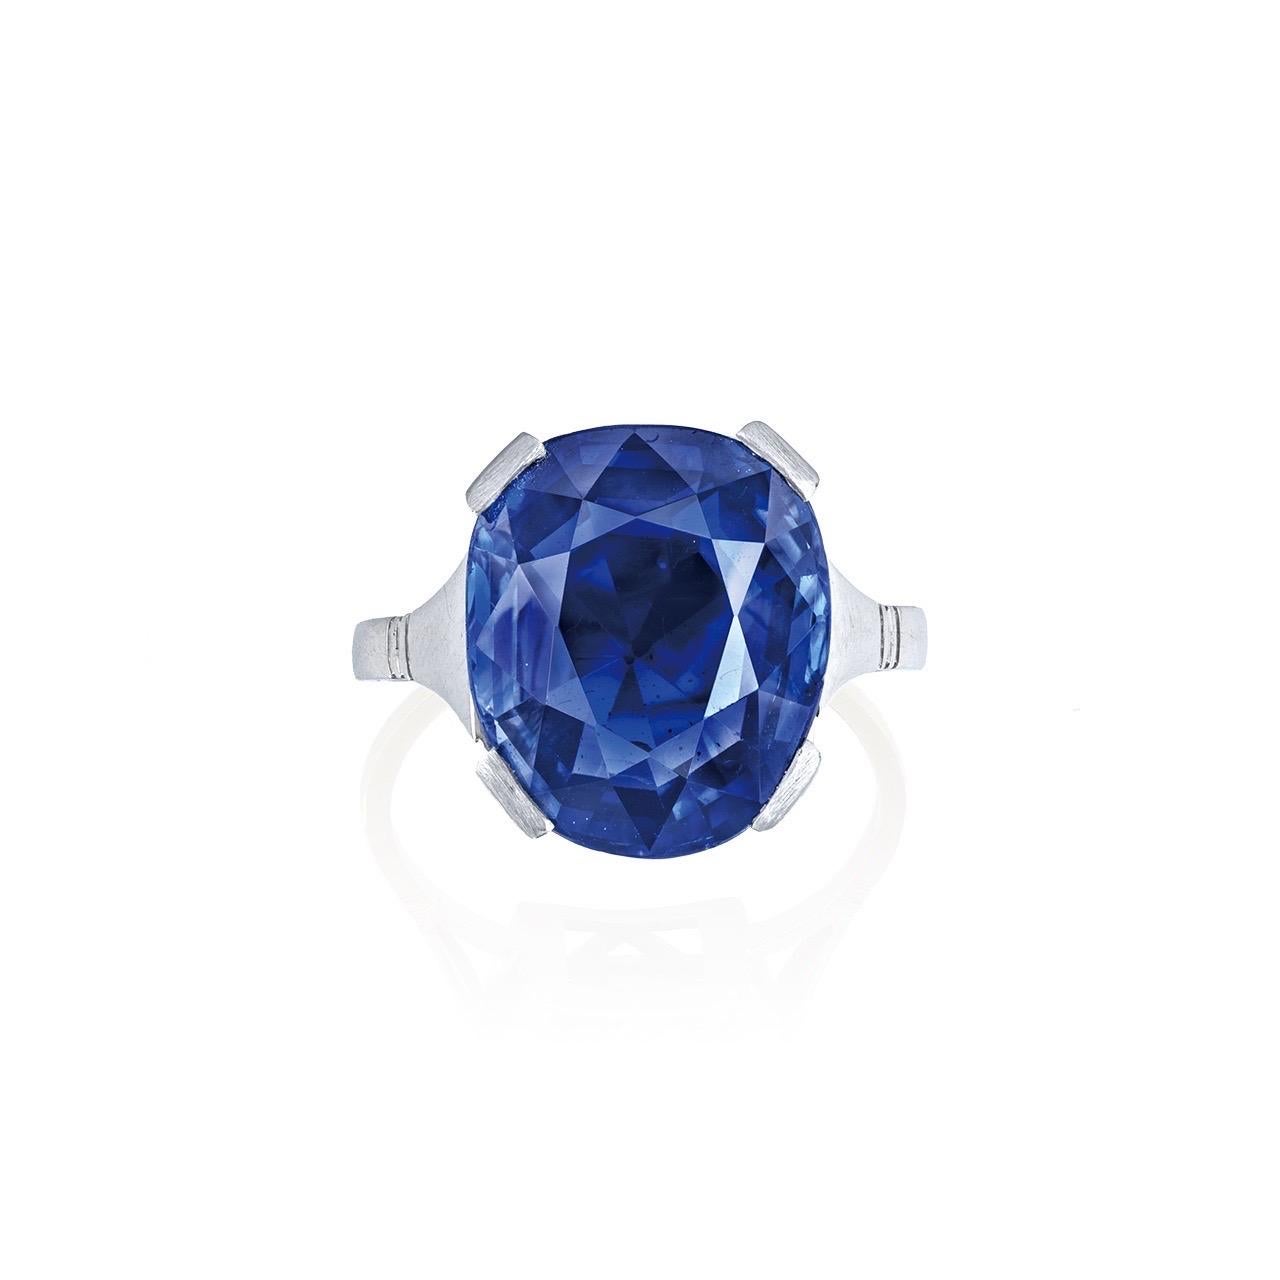 Cushion Cut Emilio Jewelry Certified Untreated Kashmir Sapphire Ring  For Sale